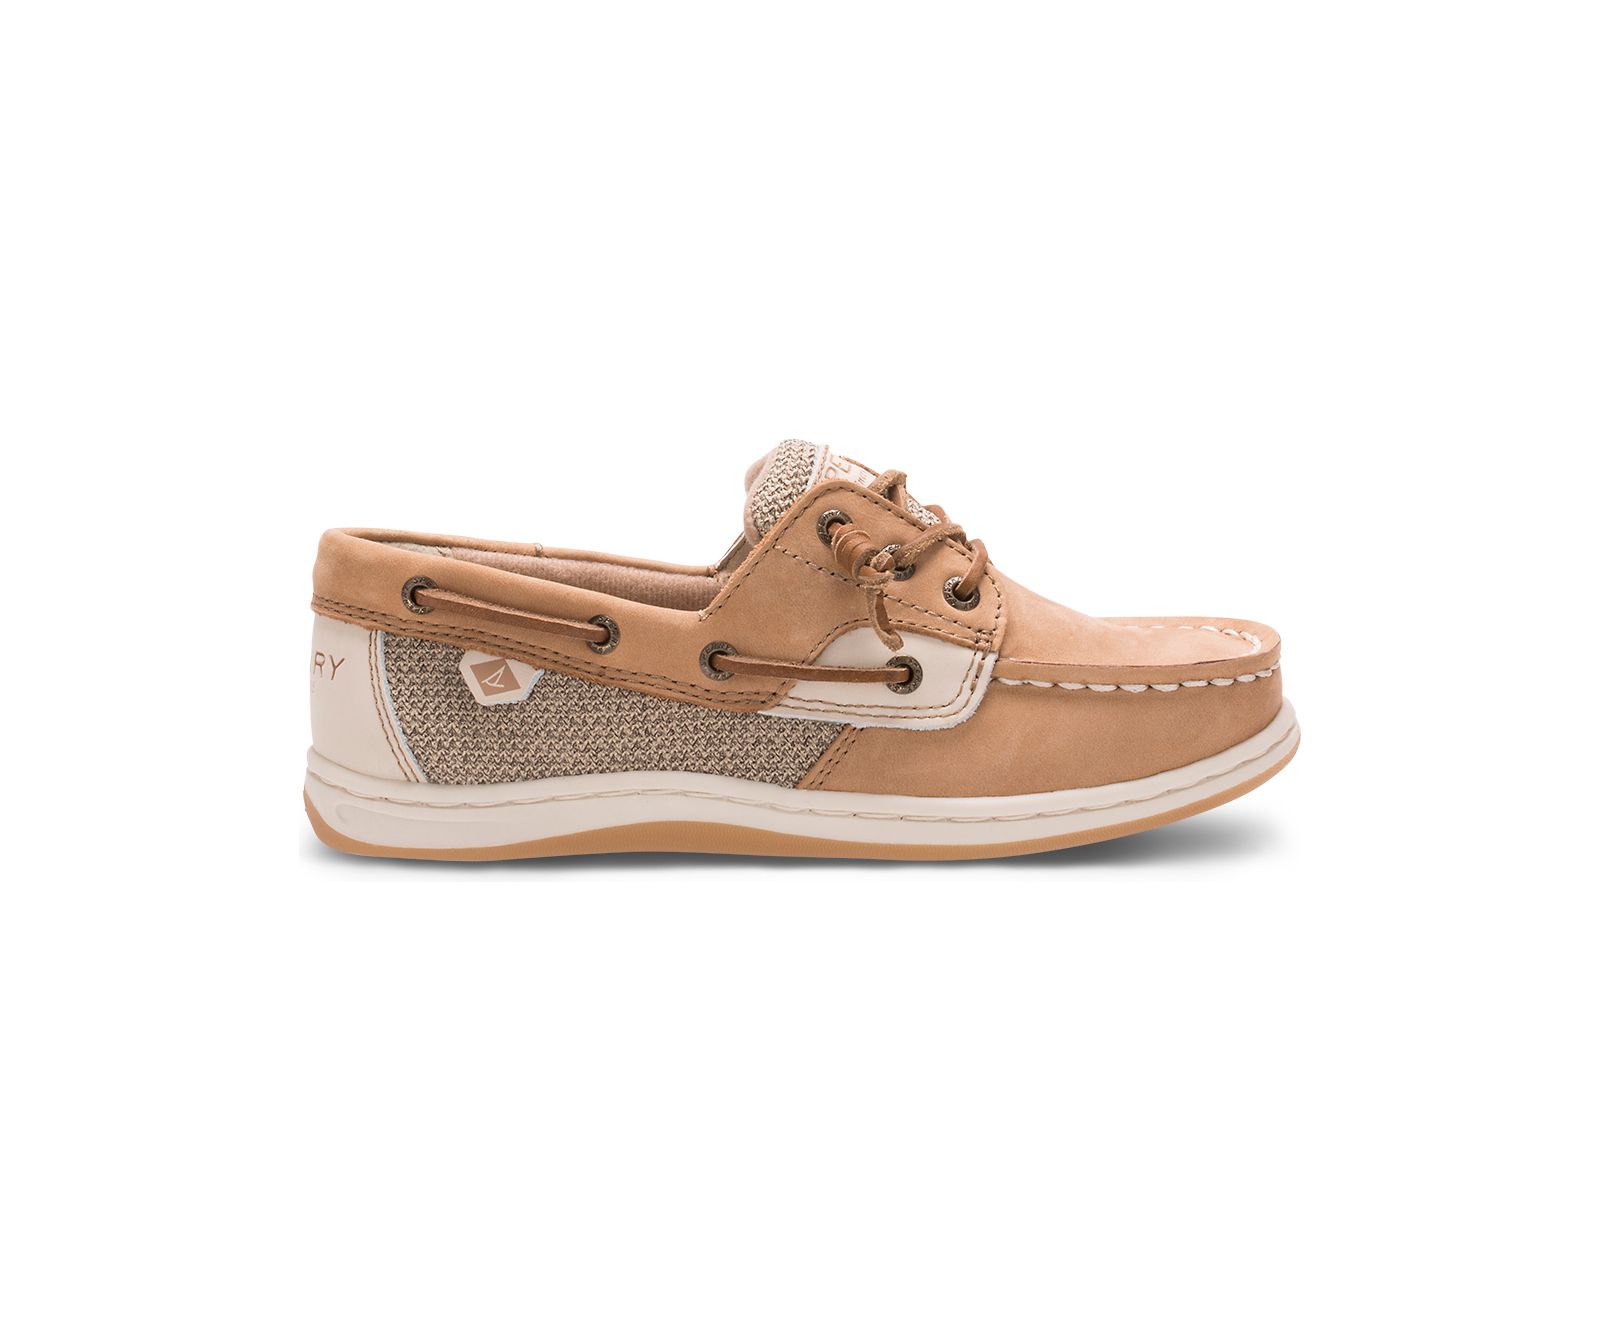 Big Kid's Songfish Boat Shoe - Linen / Oat - Click Image to Close